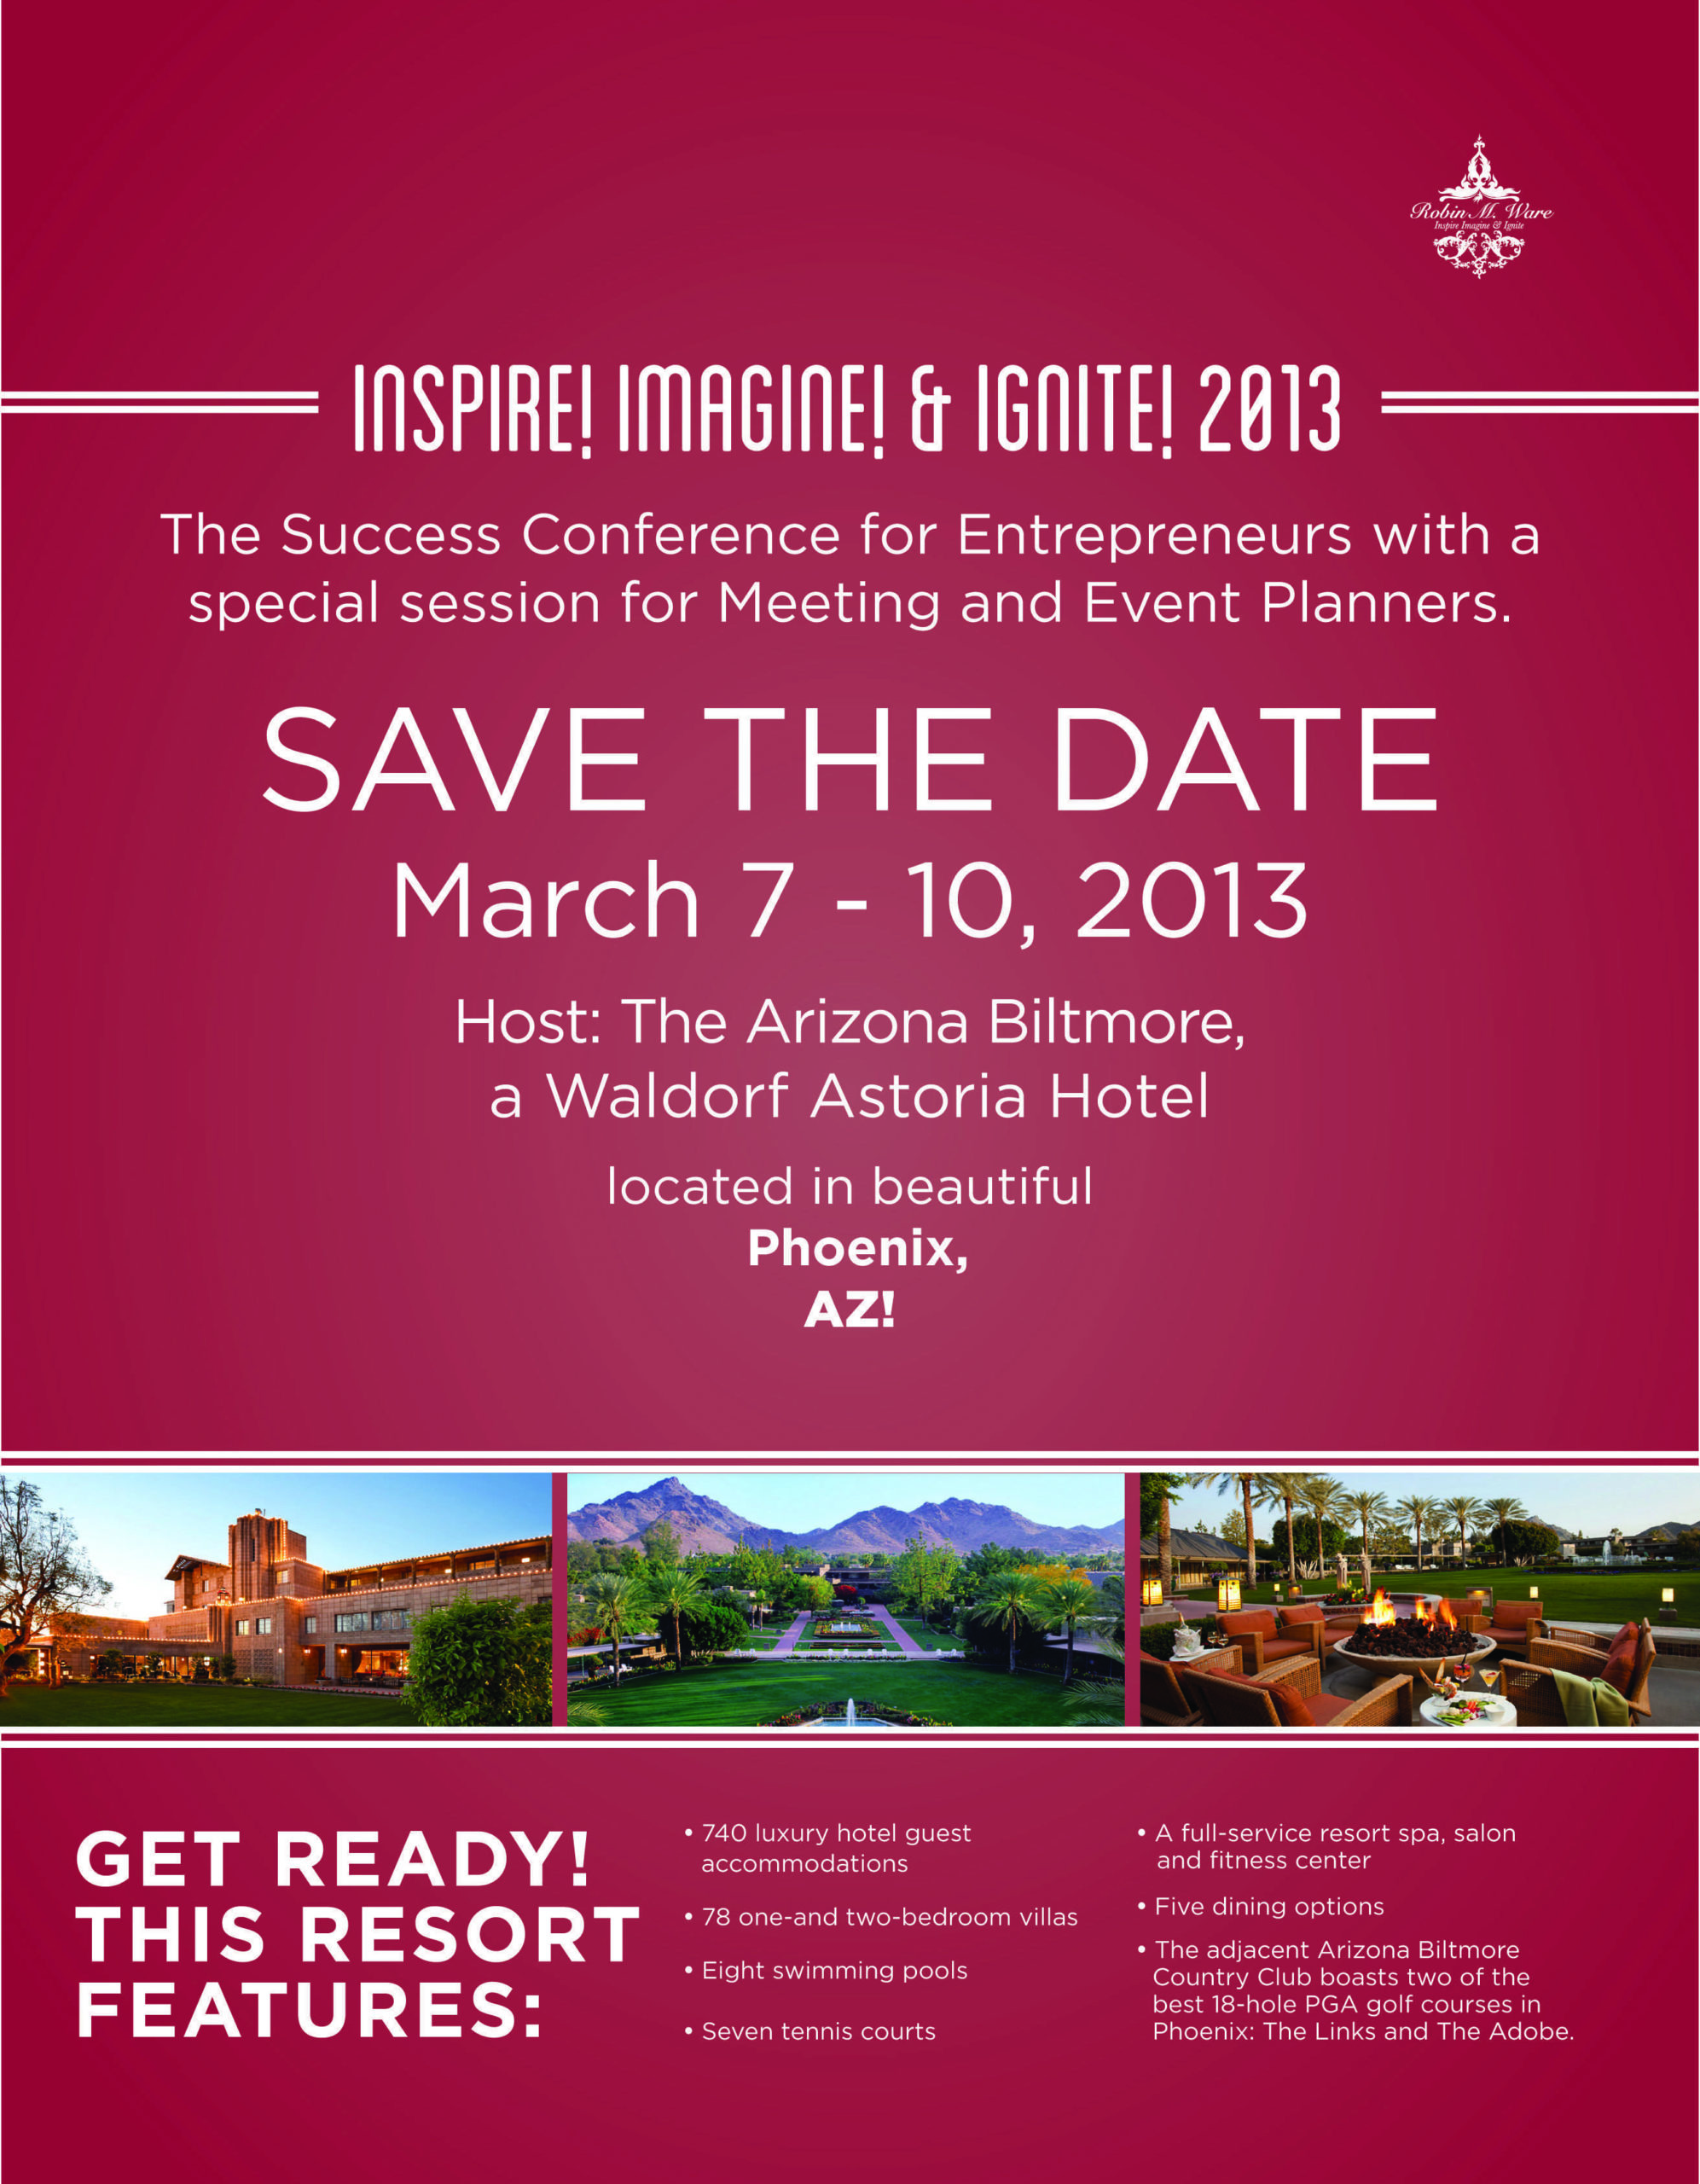 sample save the date cards for business events 2